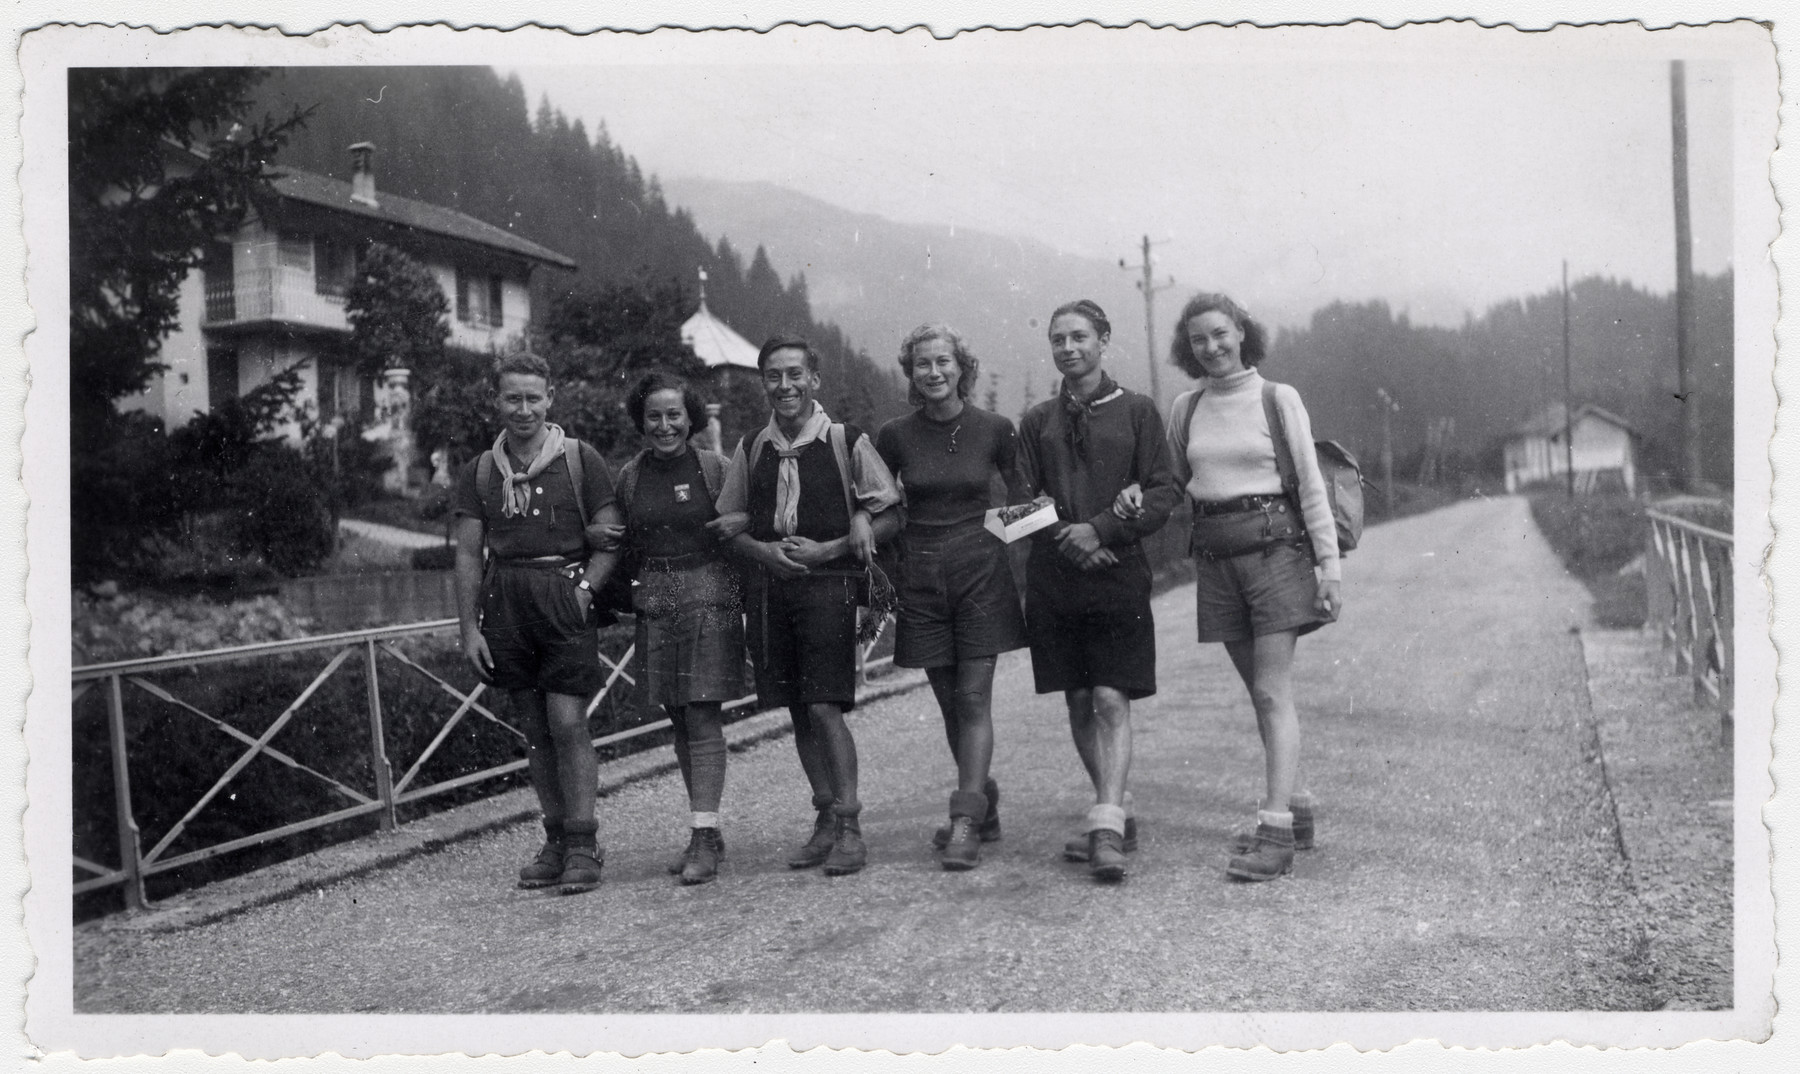 Members of the Eclaireurs Israelites go hiking in the French countryside in Saint Gervais les Condamines.

Enri Moskow is pictured on the far left.